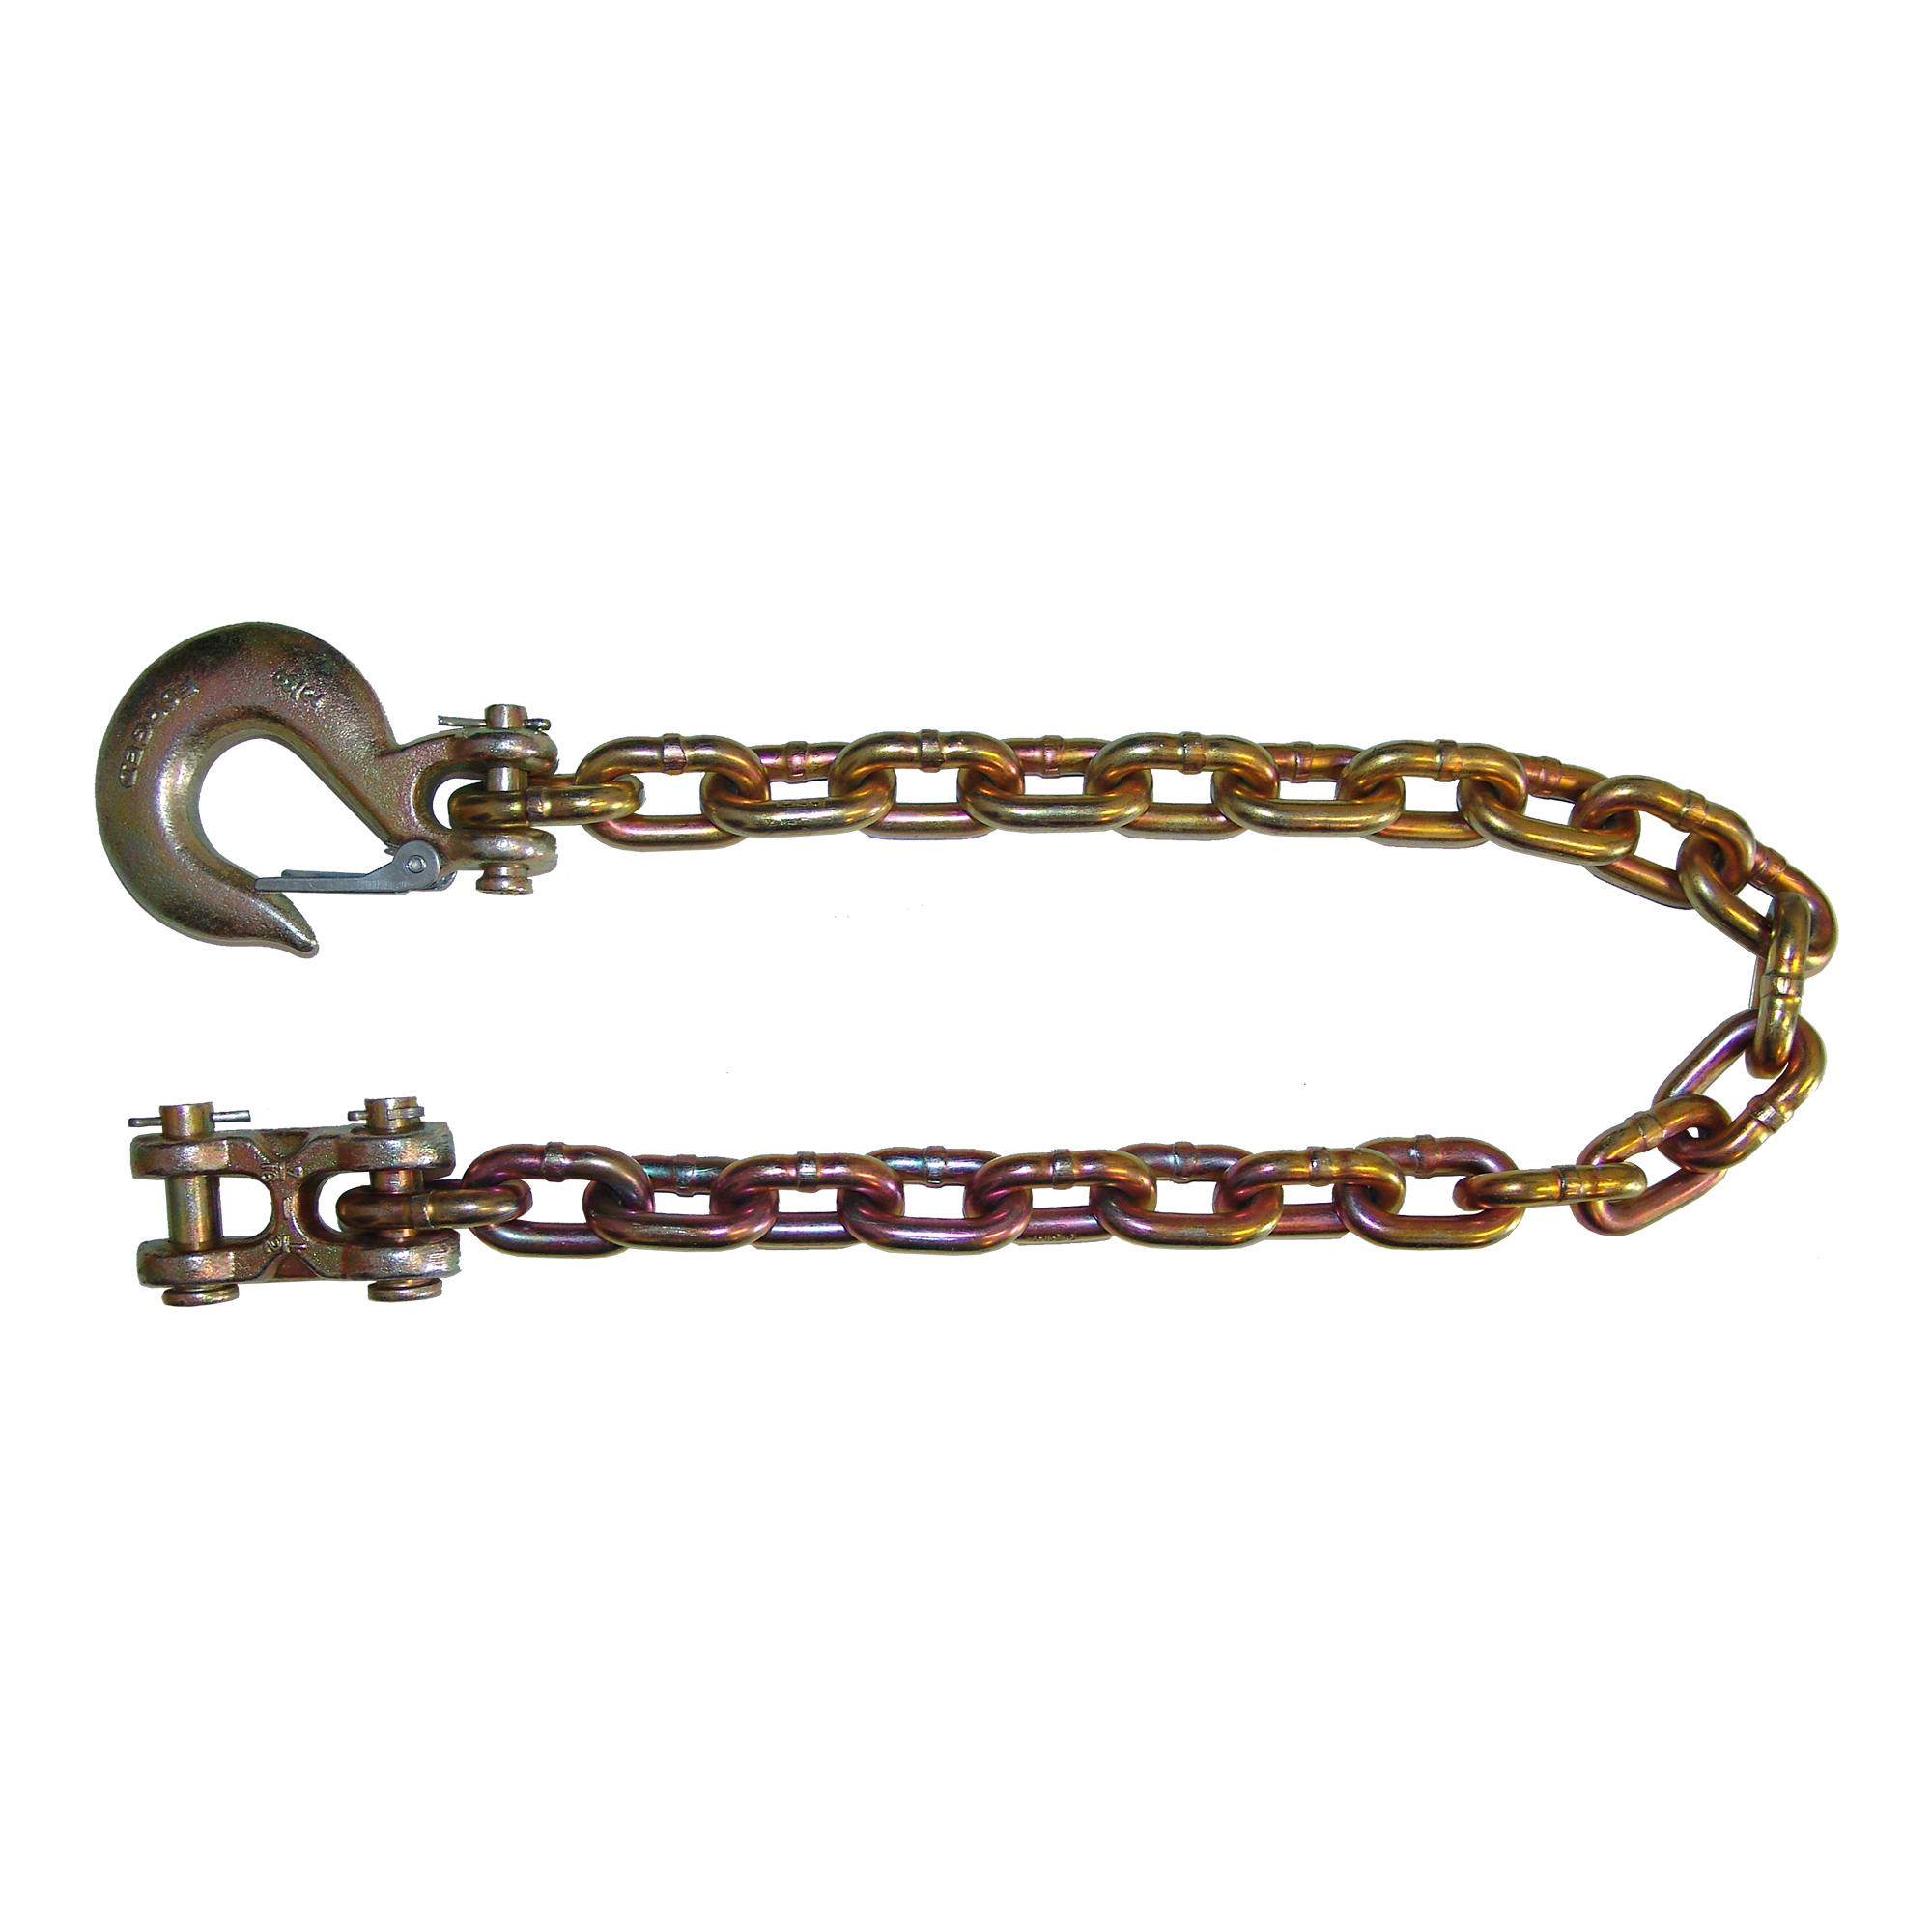 32 1/2 26,400lb Safety Chain with Hook & Masterlink